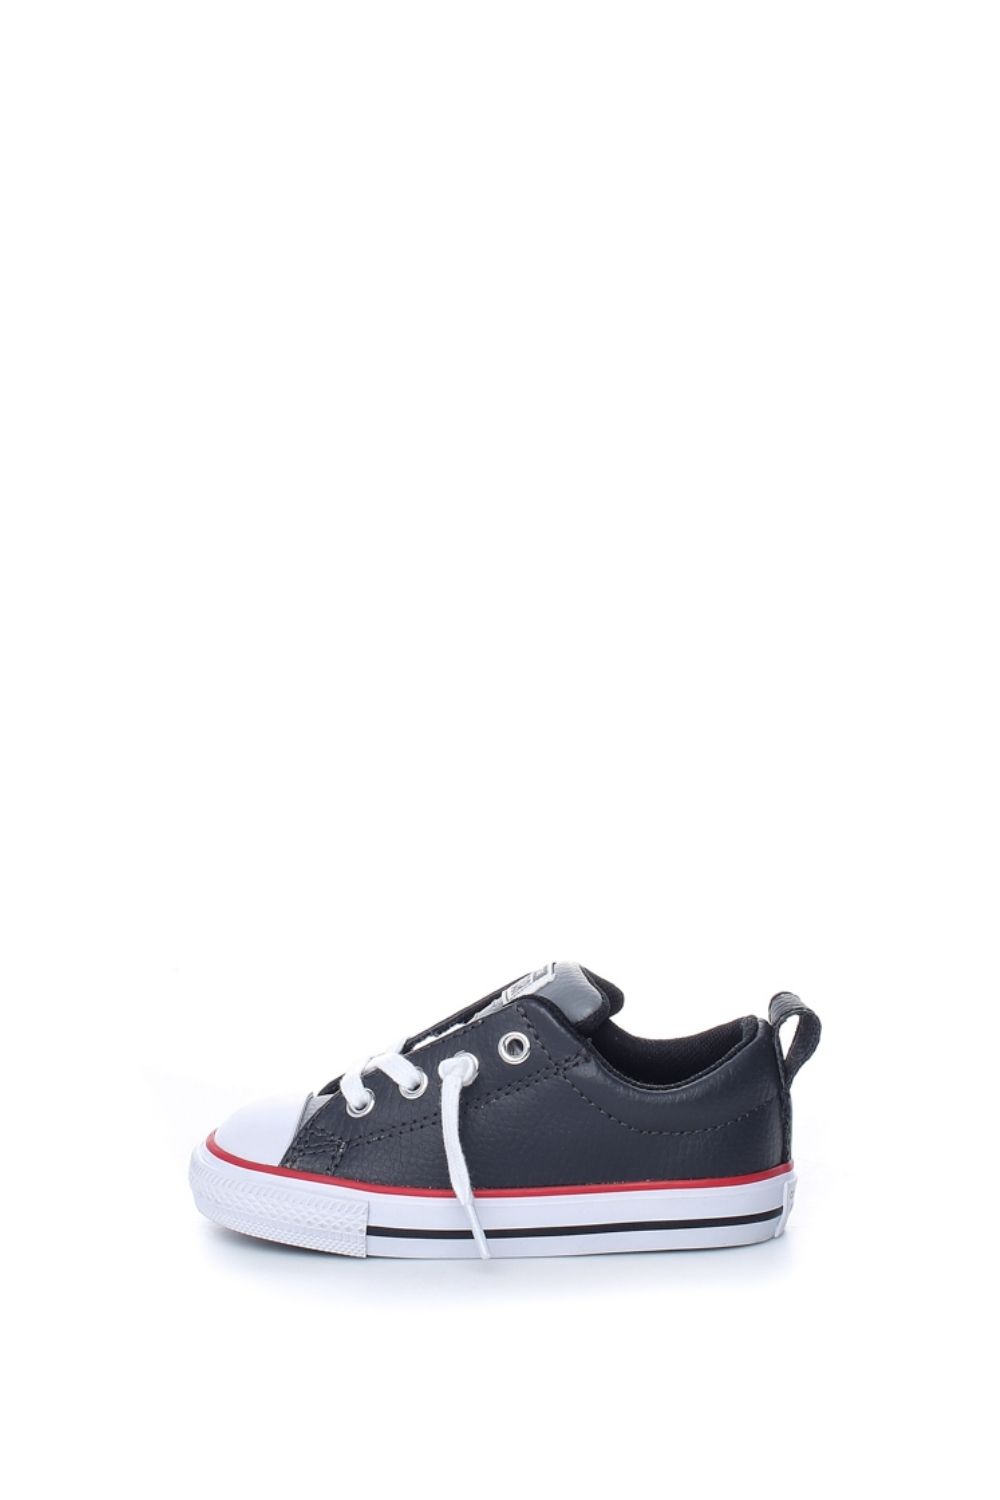 CONVERSE - Βρεφικά sneakers CONVERSE CHUCK TAYLOR ALL STAR STREET μαύρα Παιδικά/Baby/Παπούτσια/Sneakers